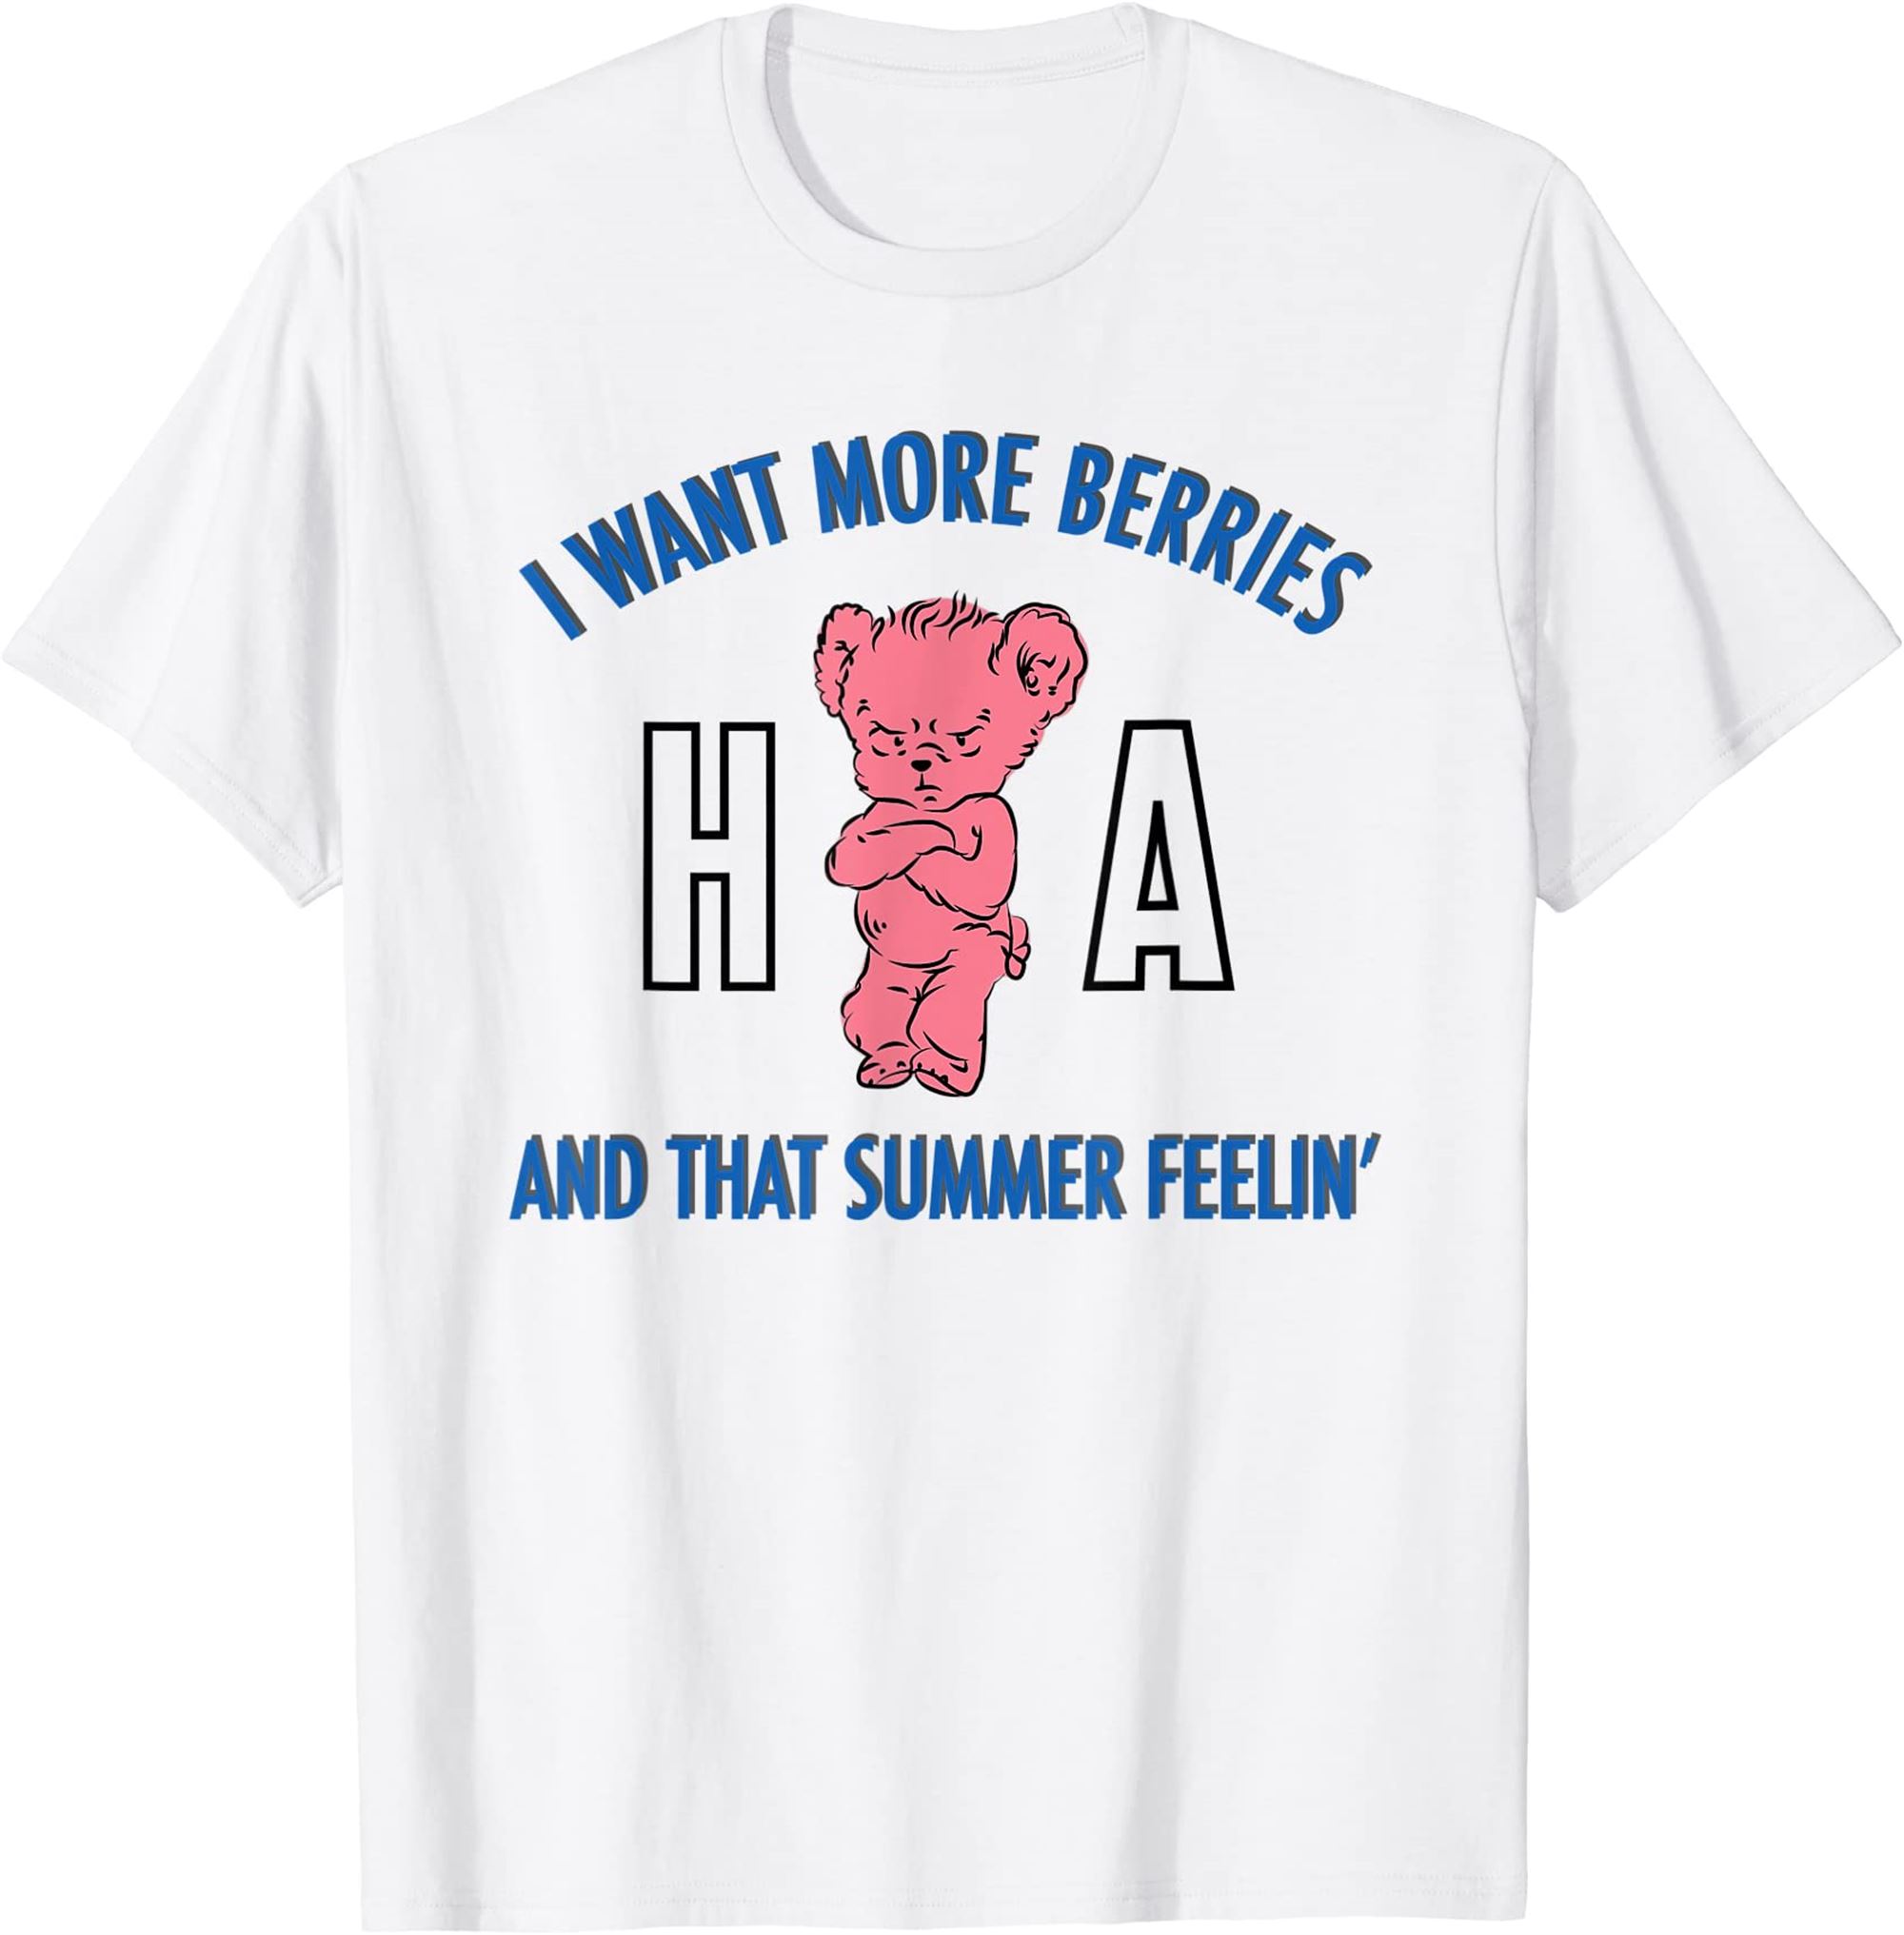 More Berries Angry Bear T-shirt Full Size Up To 5xl